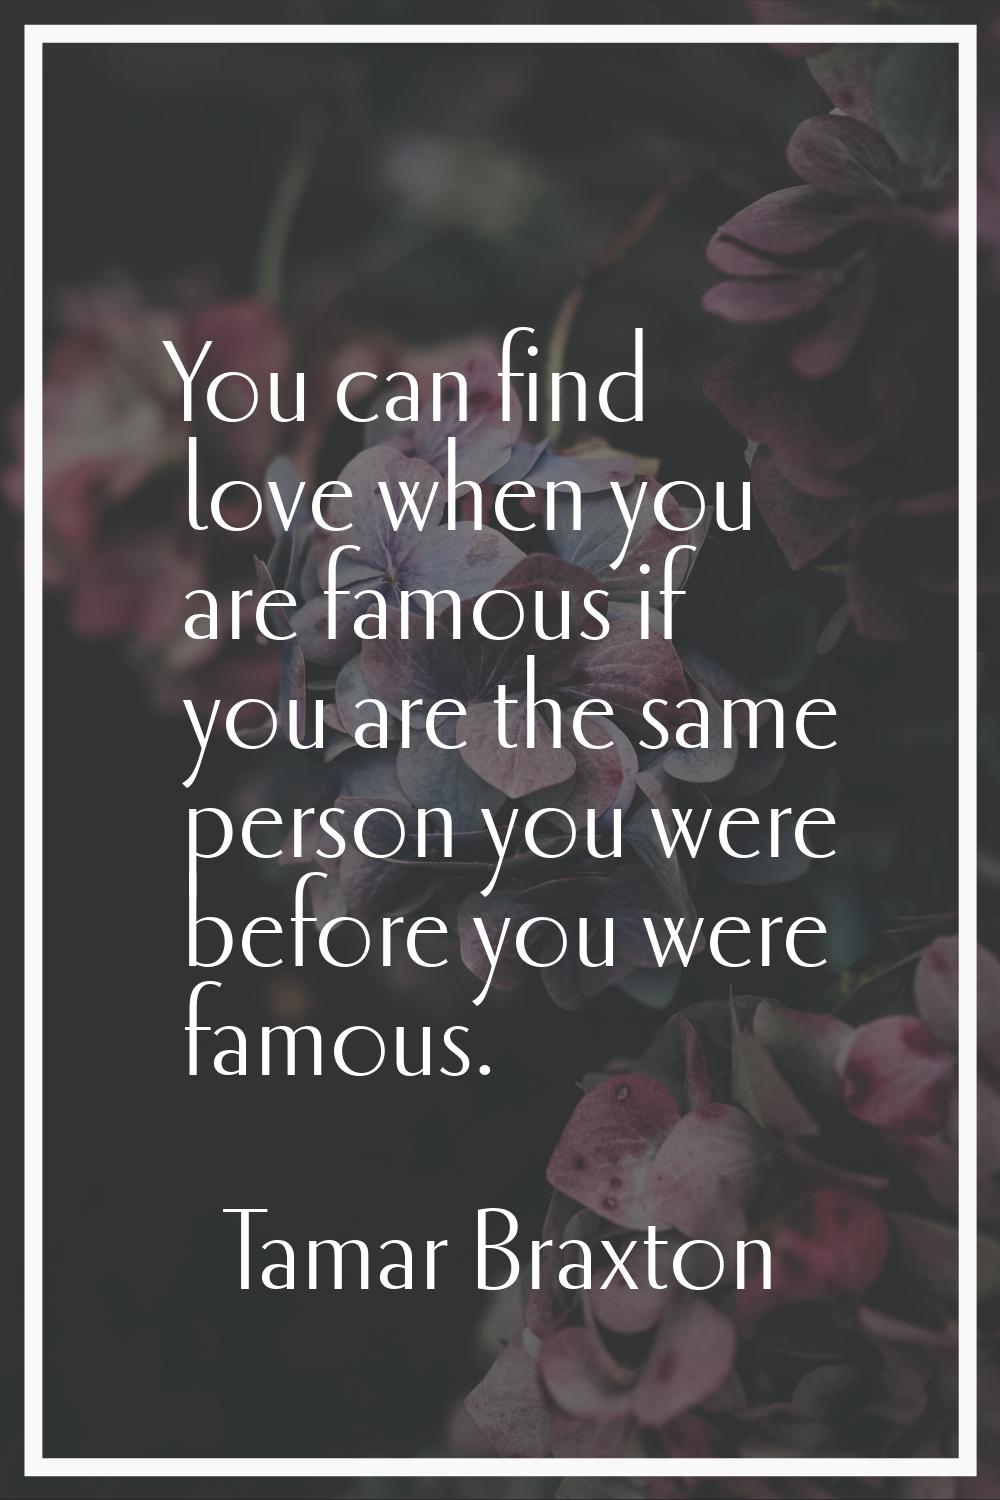 You can find love when you are famous if you are the same person you were before you were famous.